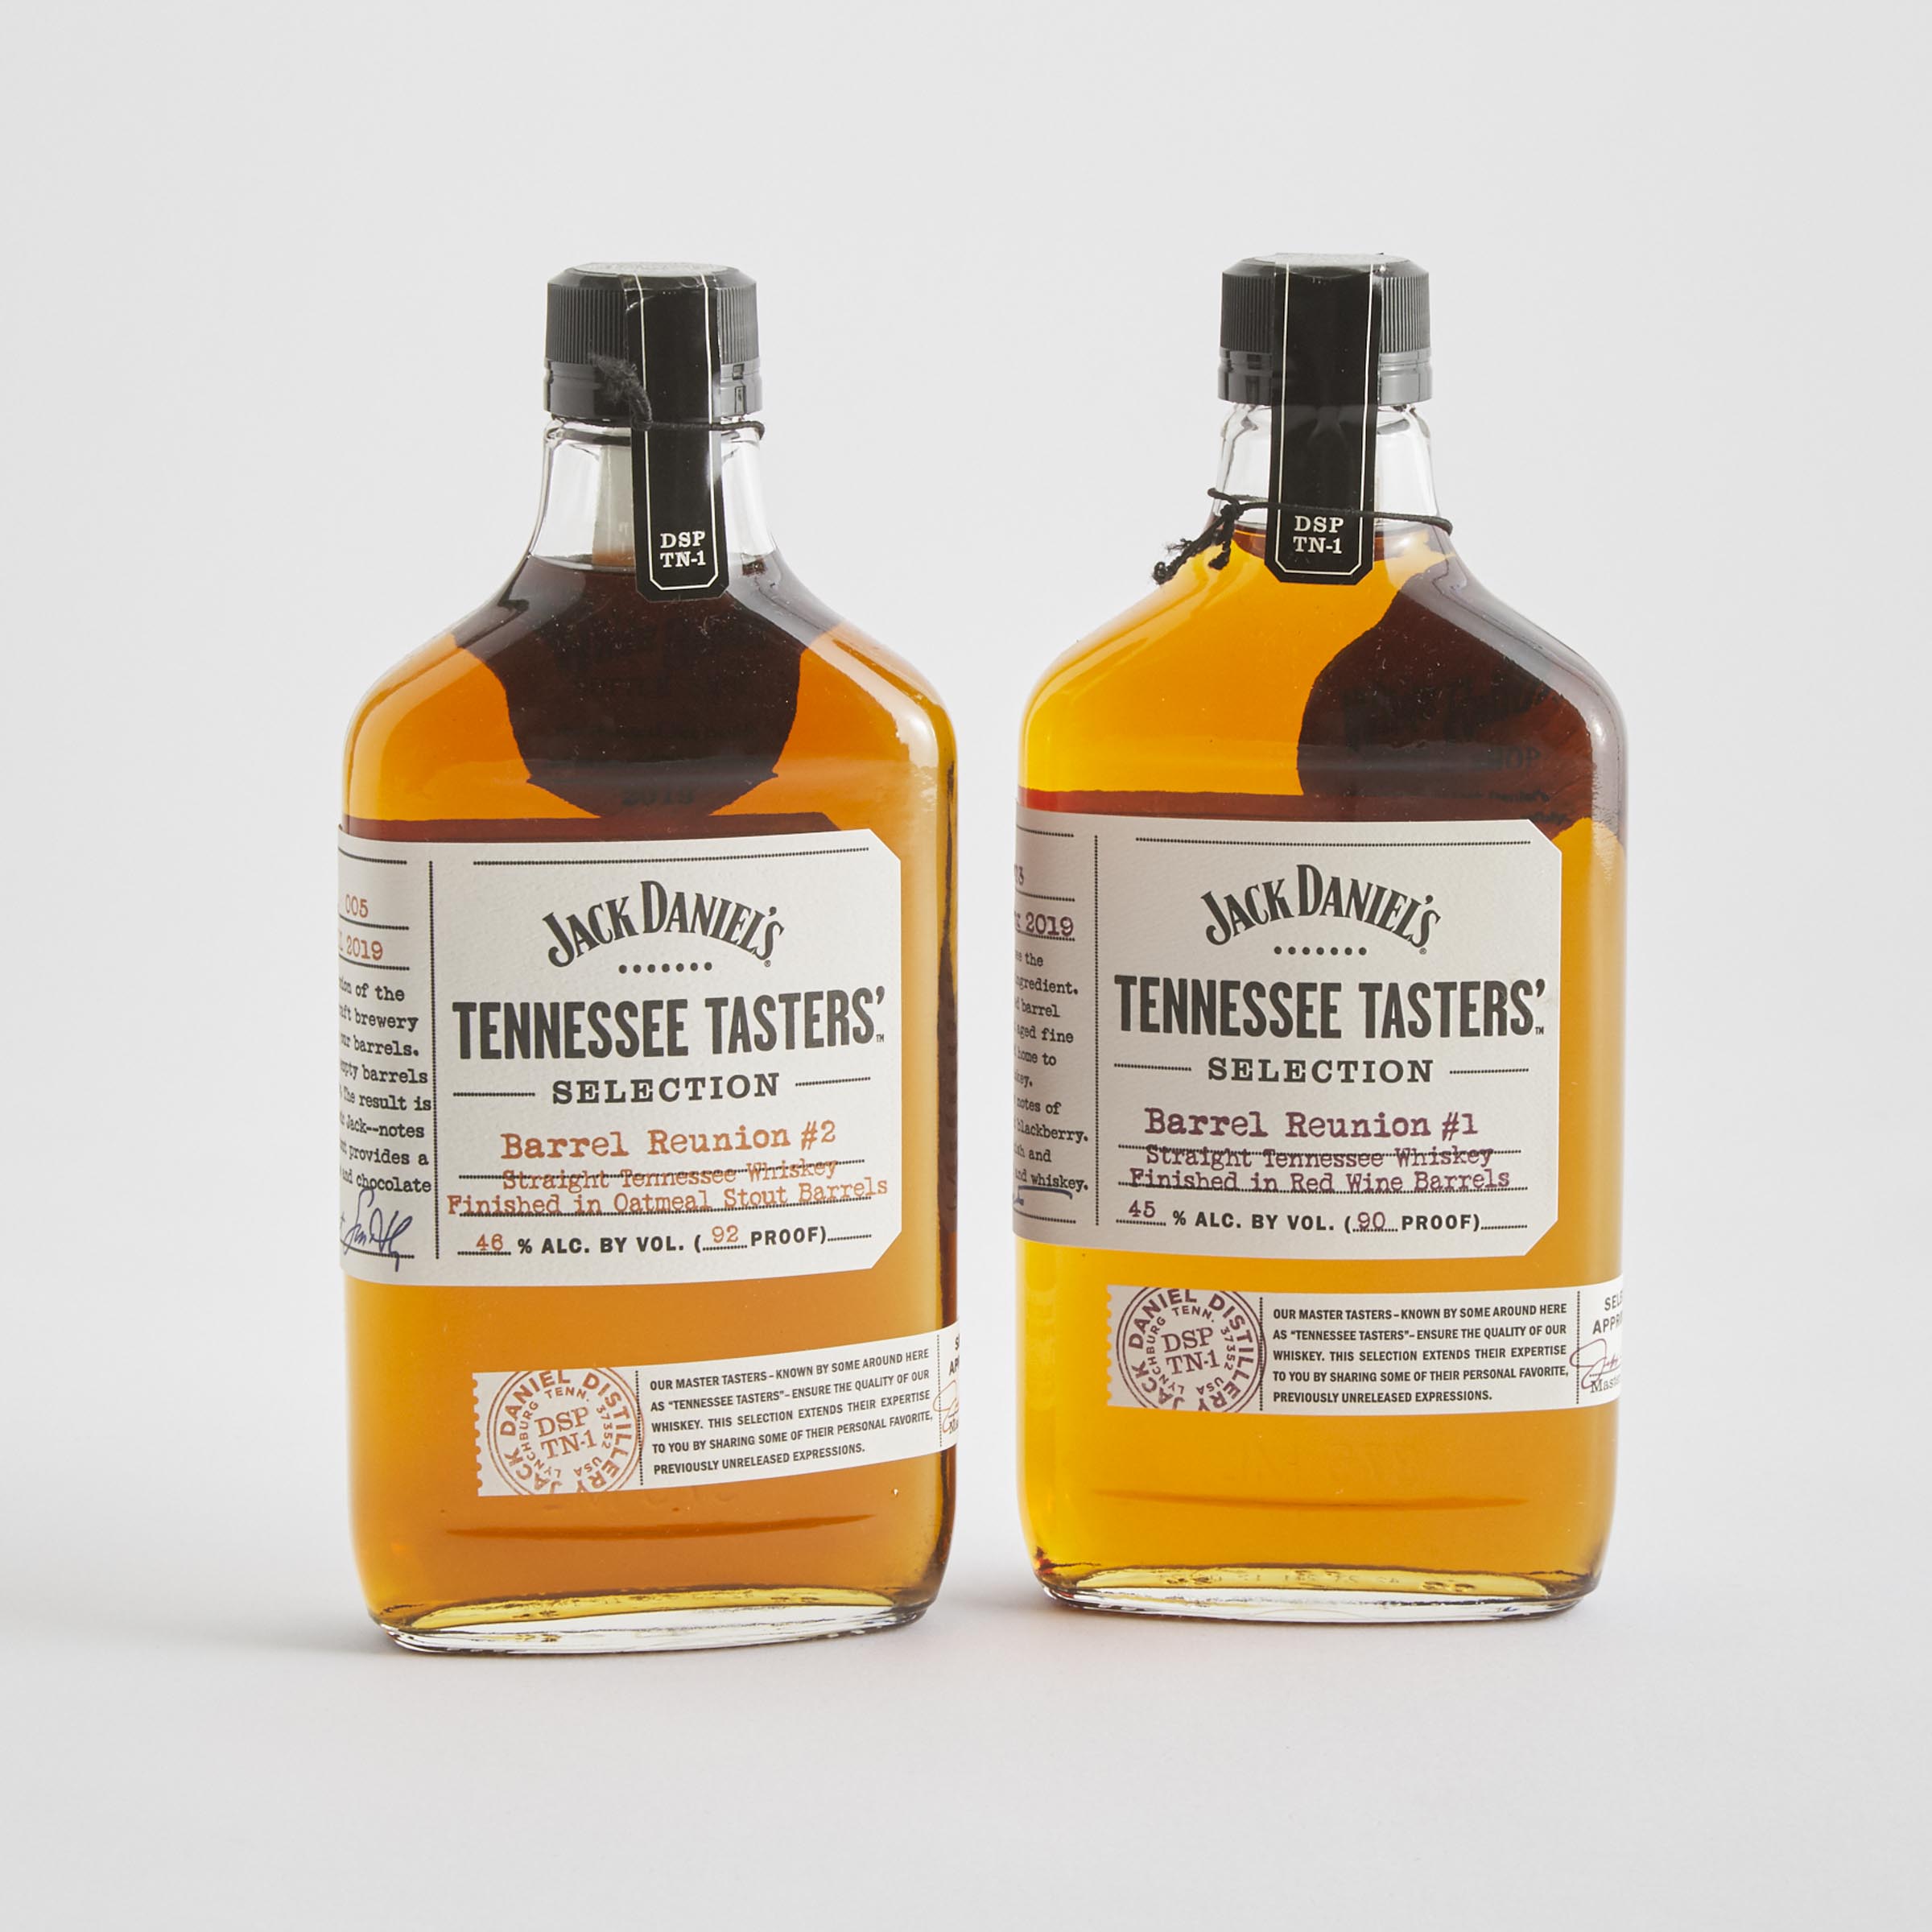 JACK DANIEL'S STRAIGHT TENNESSEE WHISKEY (ONE 750 ML)
JACK DANIEL'S STRAIGHT TENNESSEE WHISKEY (ONE 750 ML)